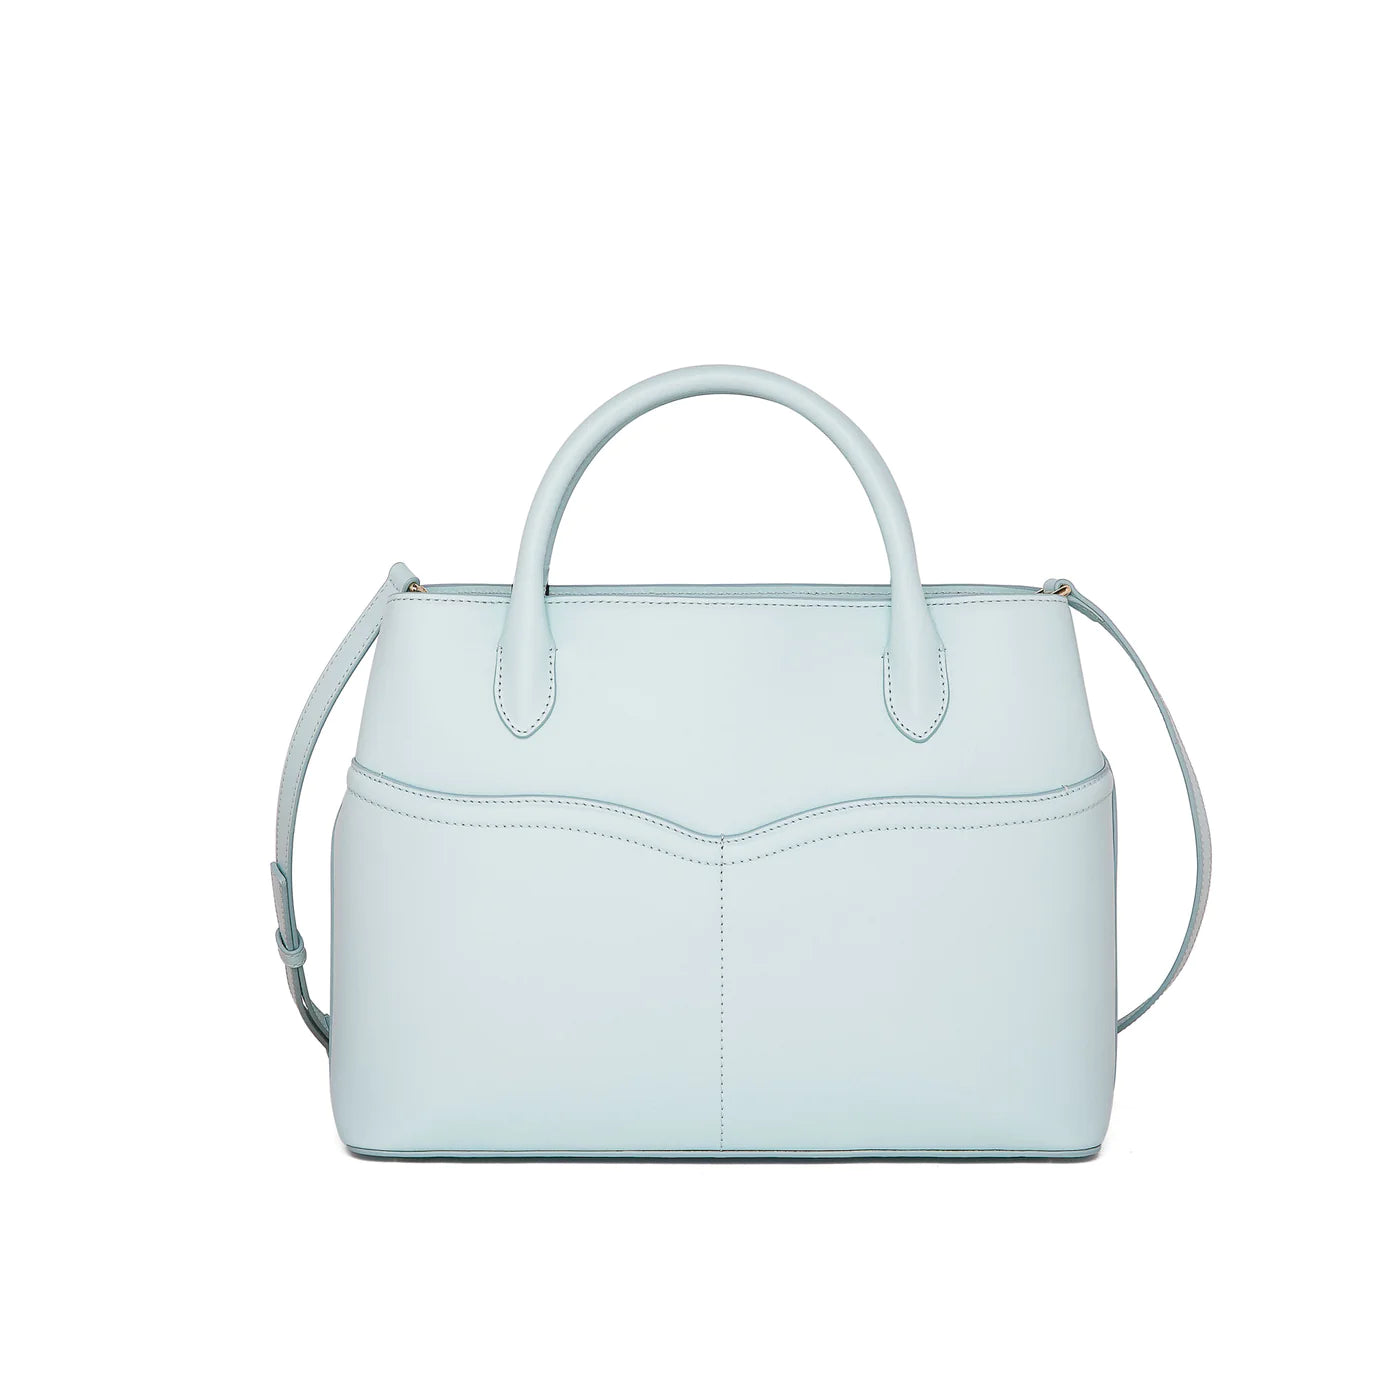 The Spirit of Mulan Small Tote - Mint